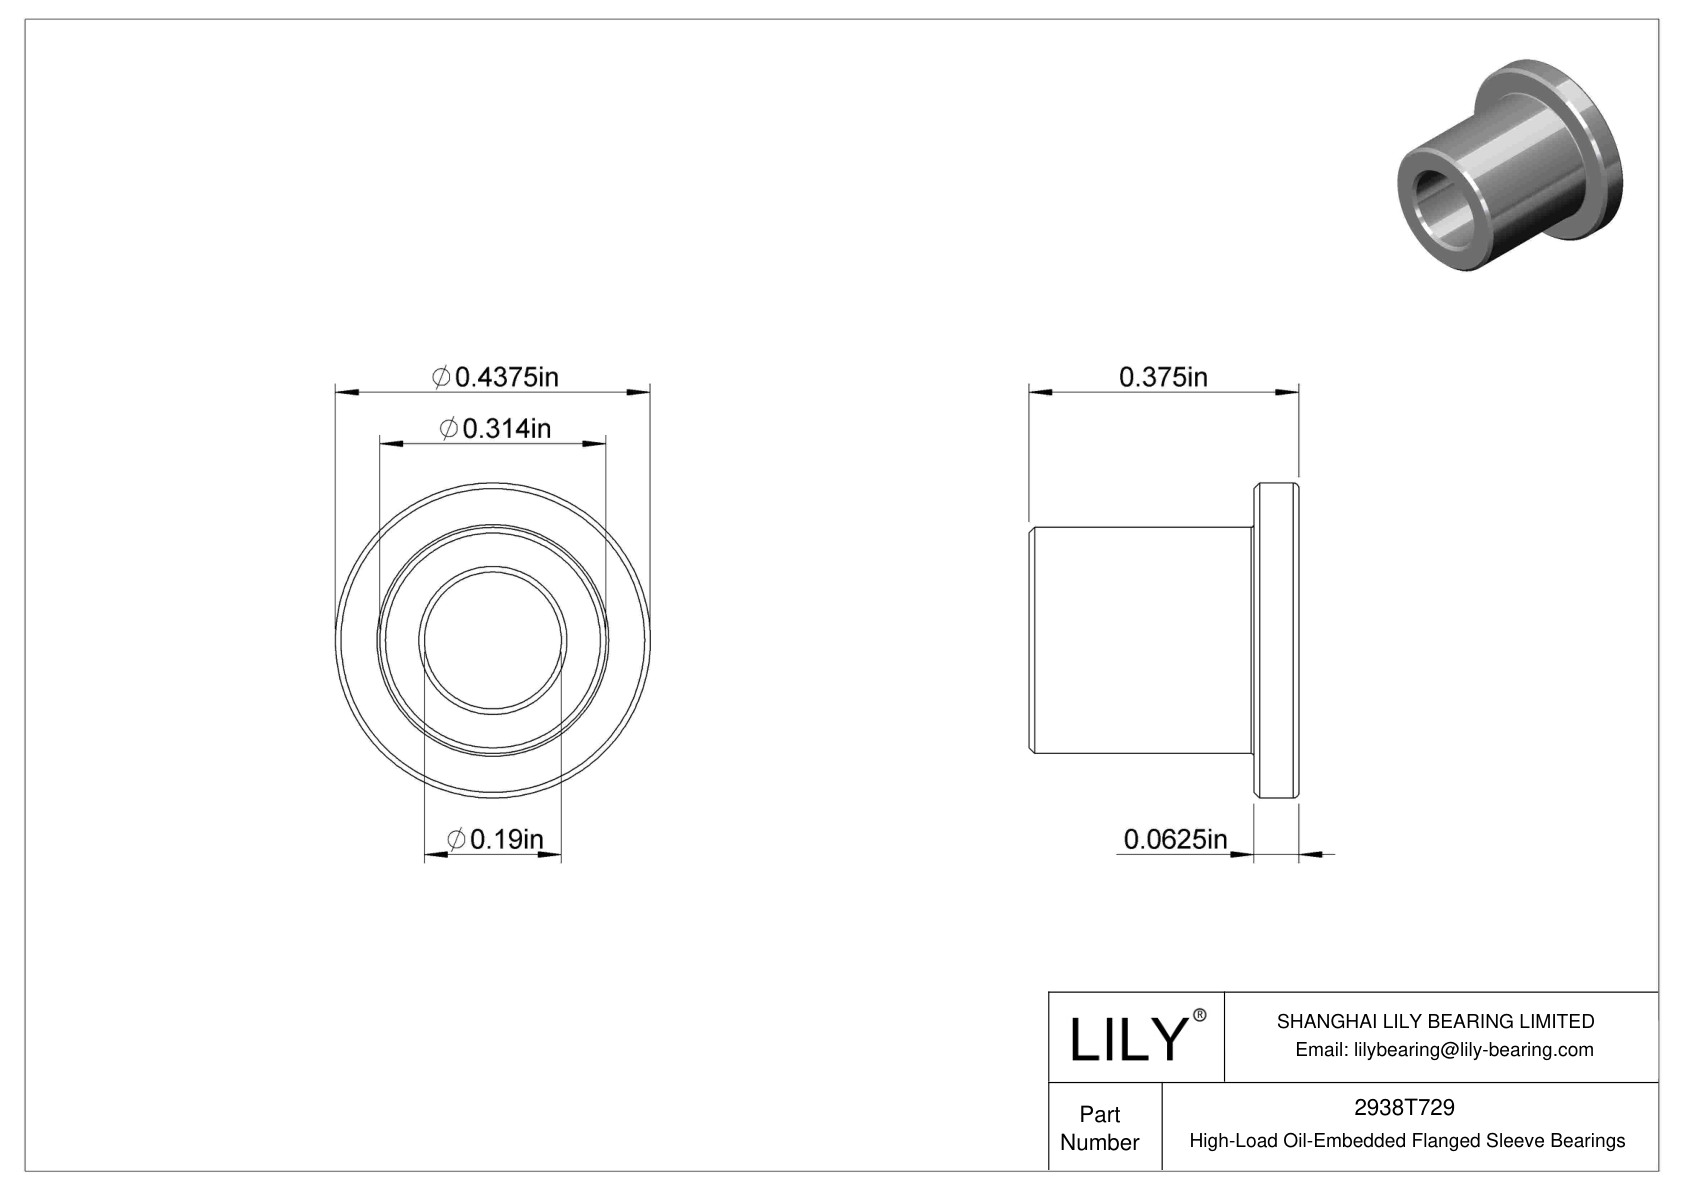 CJDITHCJ High-Load Oil-Embedded Flanged Sleeve Bearings cad drawing